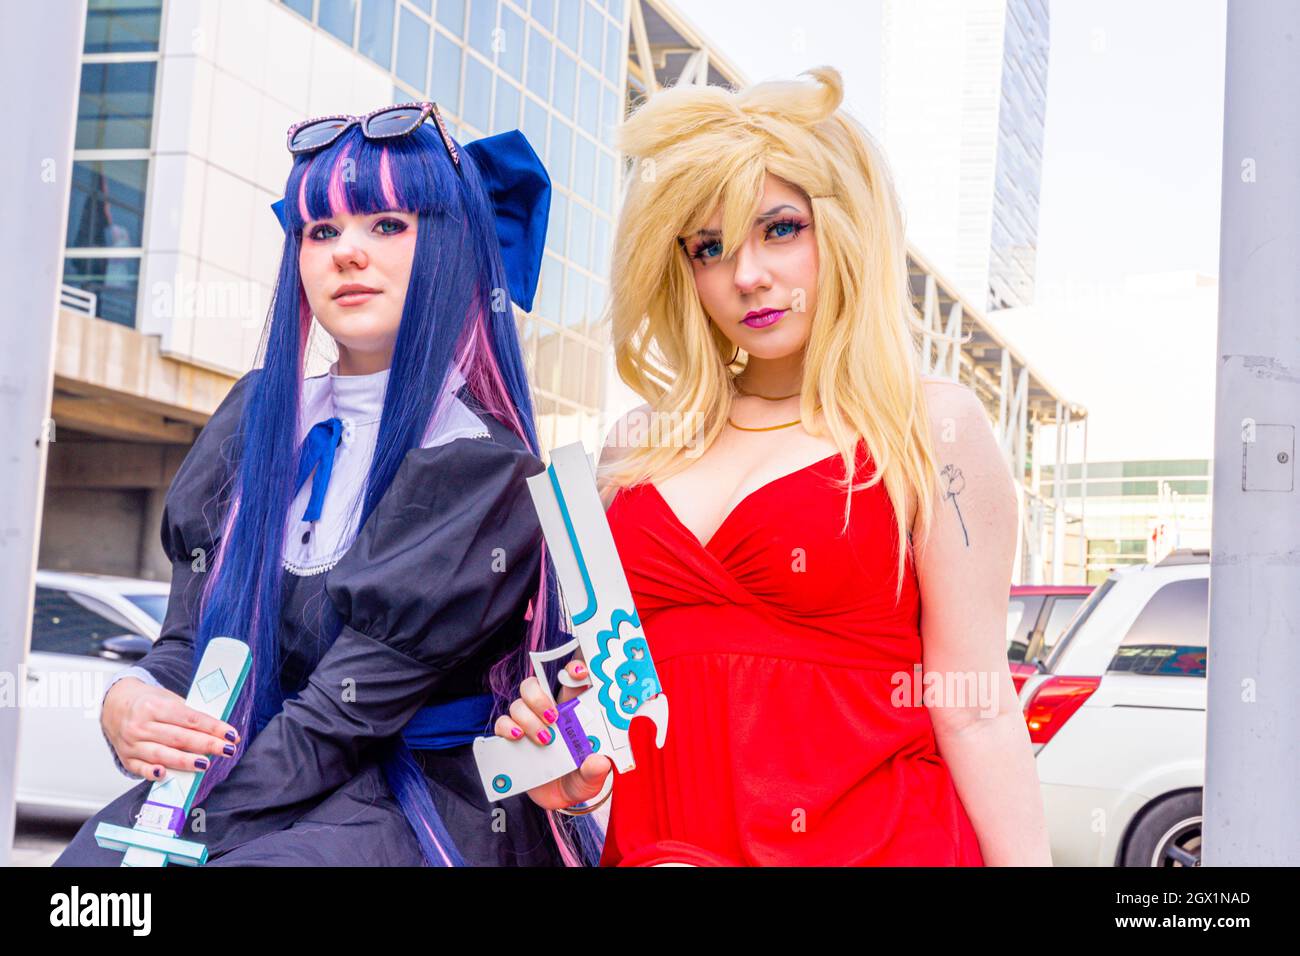 Attendee portraying Panty and Stocking in uniforms outfits, at Comic Con in Los Angeles, CA, United States Stock Photo